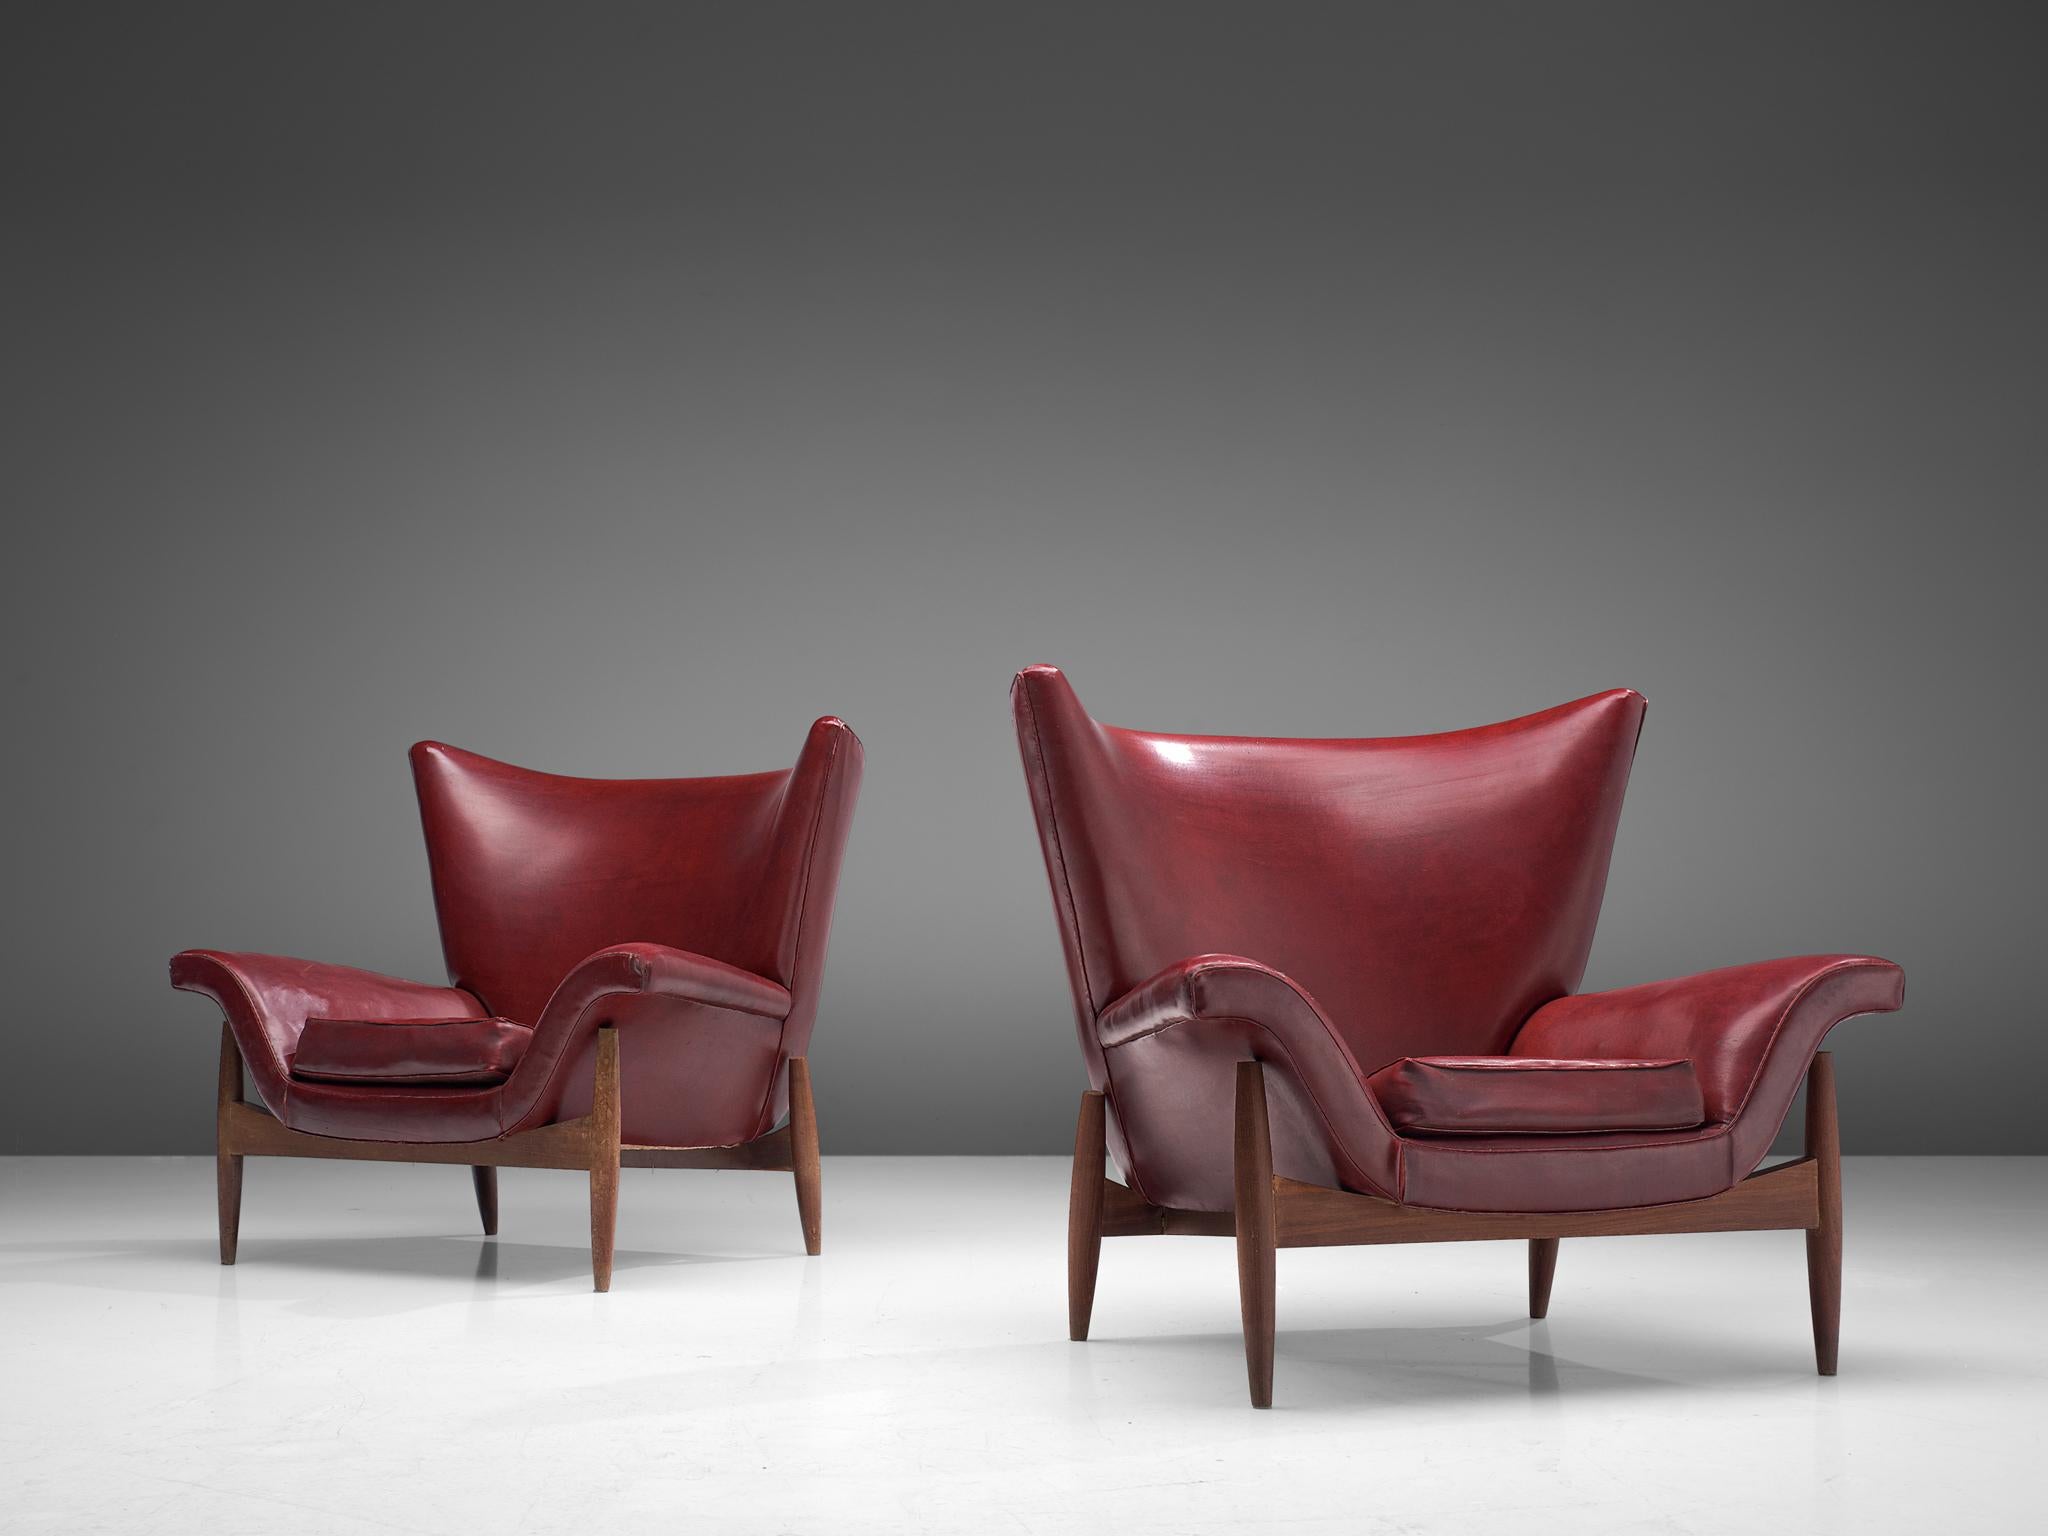 Pair of wingback chairs, leatherette and wood, Italy, 1960s

A stunning pair of Italian lounge chairs, characterized by their large, curved backs and the pointy edges. The corners of the backrests point upwards, giving these chairs a theatrical